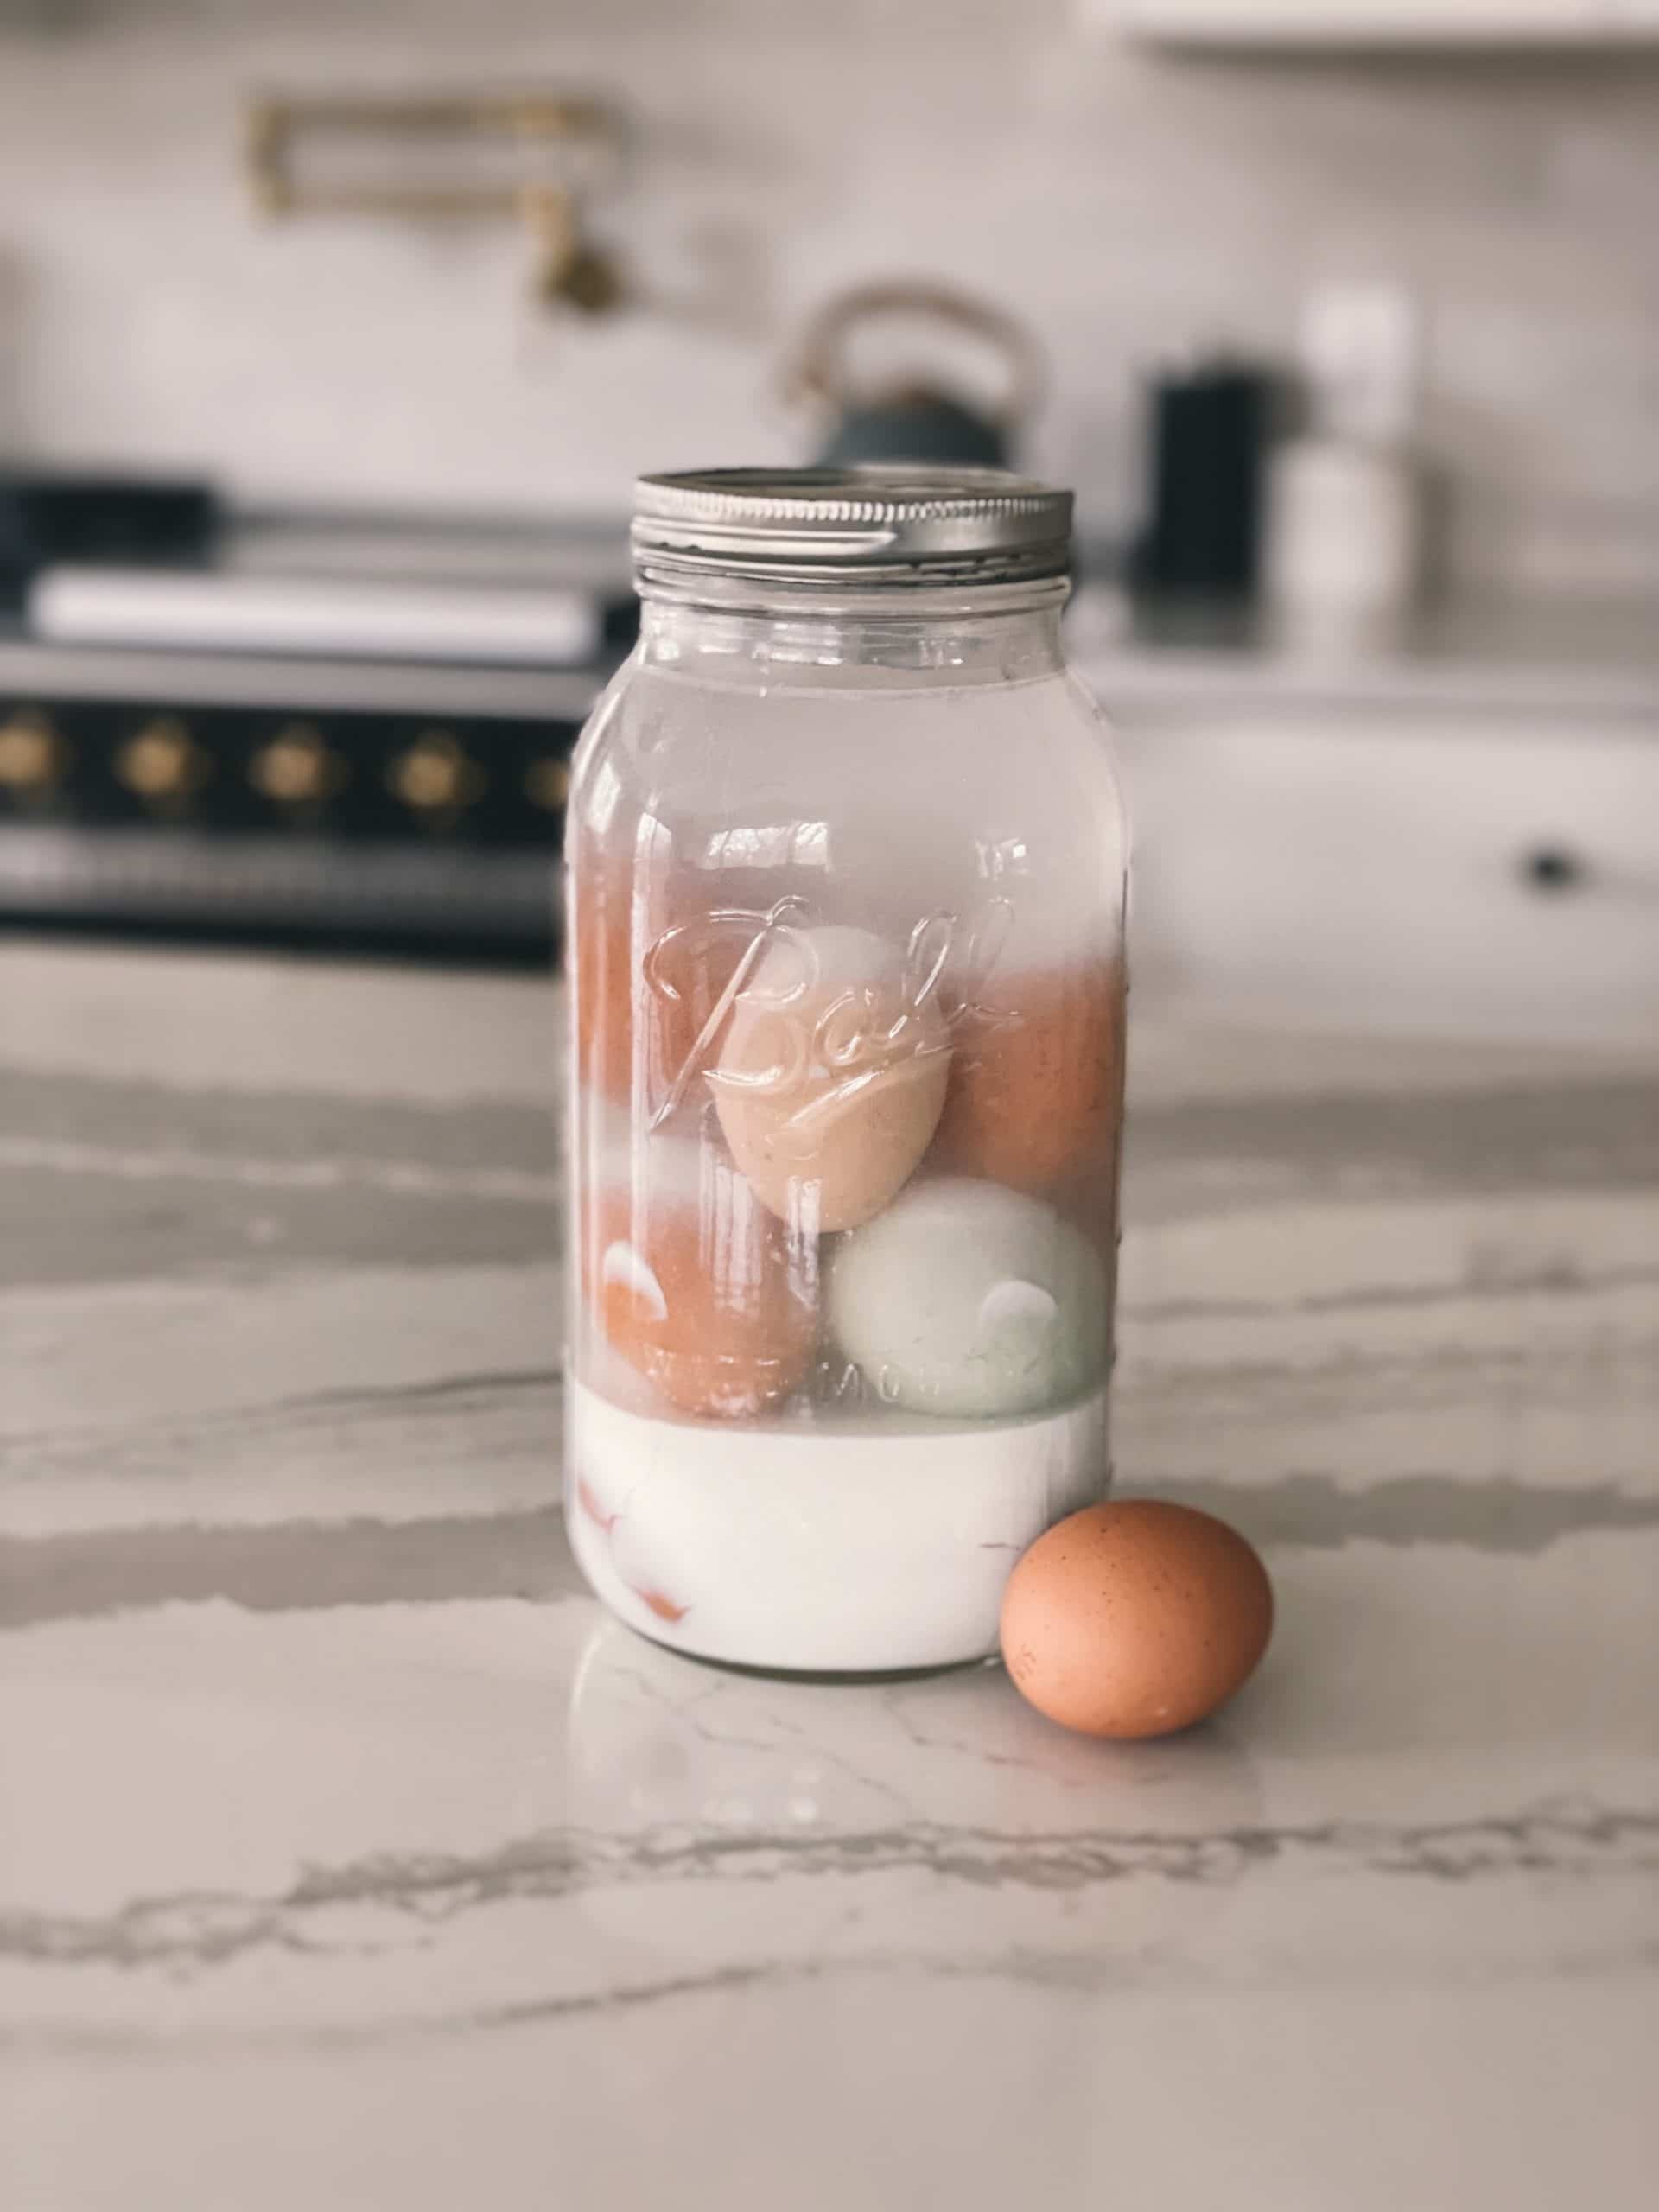 Water Glassing Eggs for Storage - The Homesteading RD